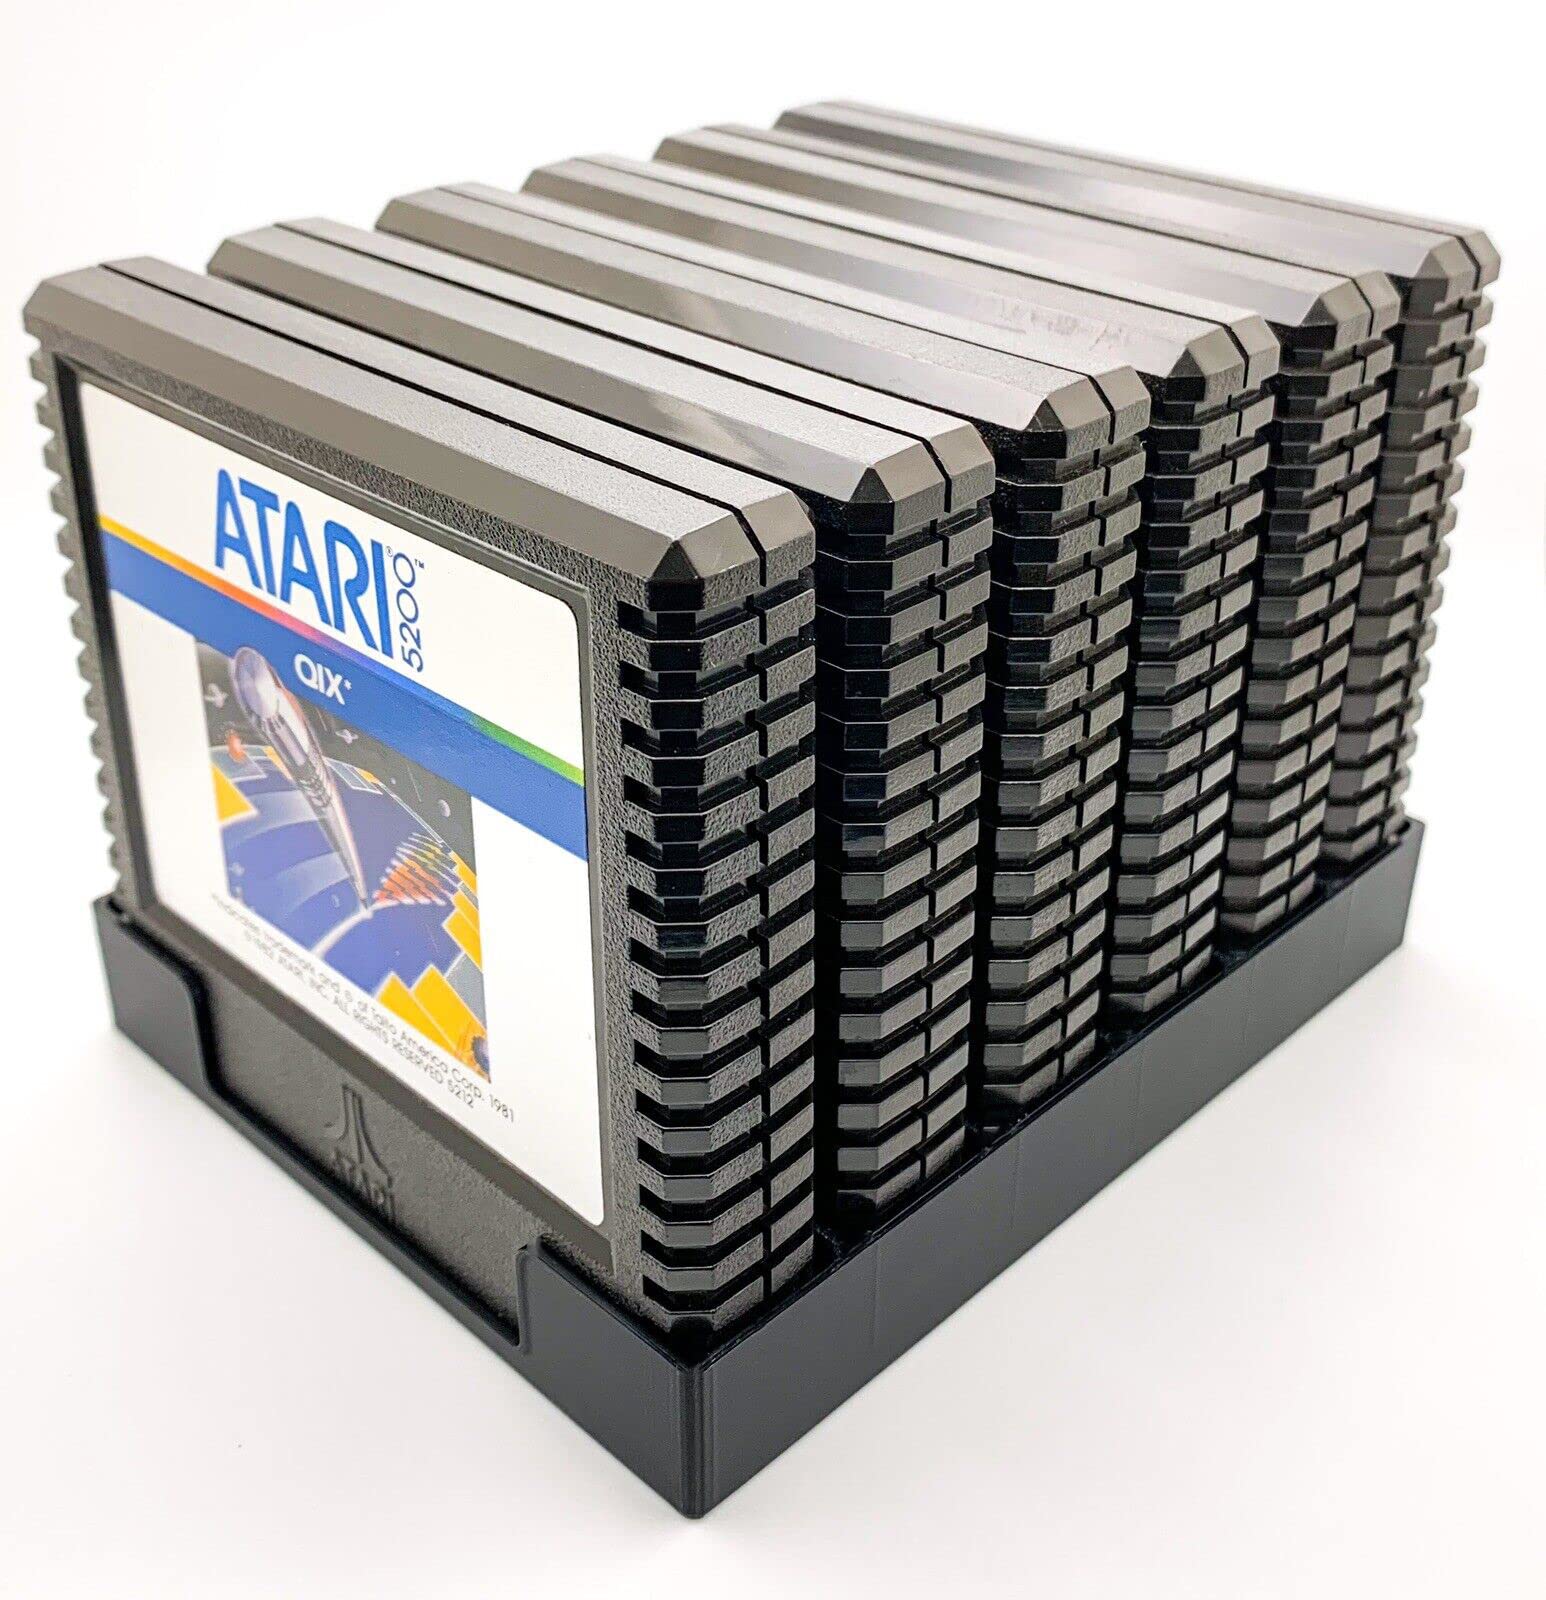 Game Cartridge Holder for Atari 5200 - Tray Holds Up To 6 Games - 5200 Display